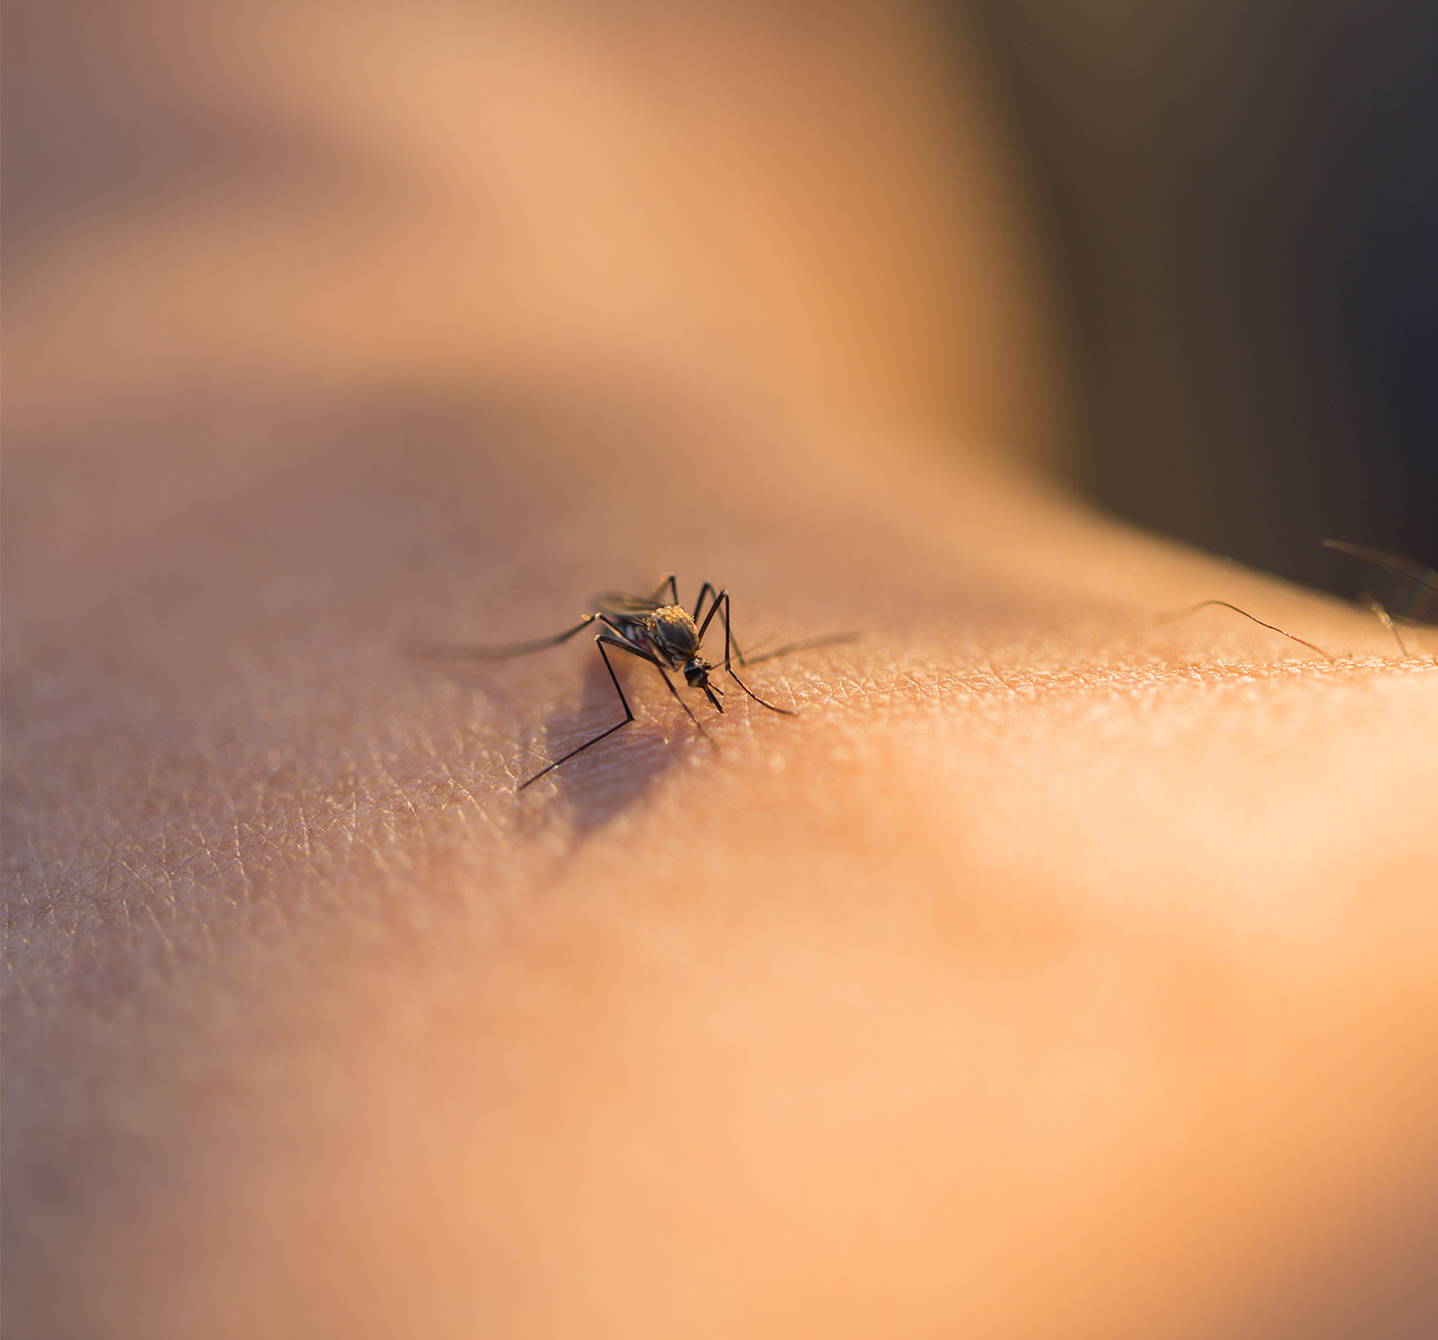 Mosquito bite allergy symptoms can include swelling, a fever or hives and may even affect your whole body. Find out more about the condition